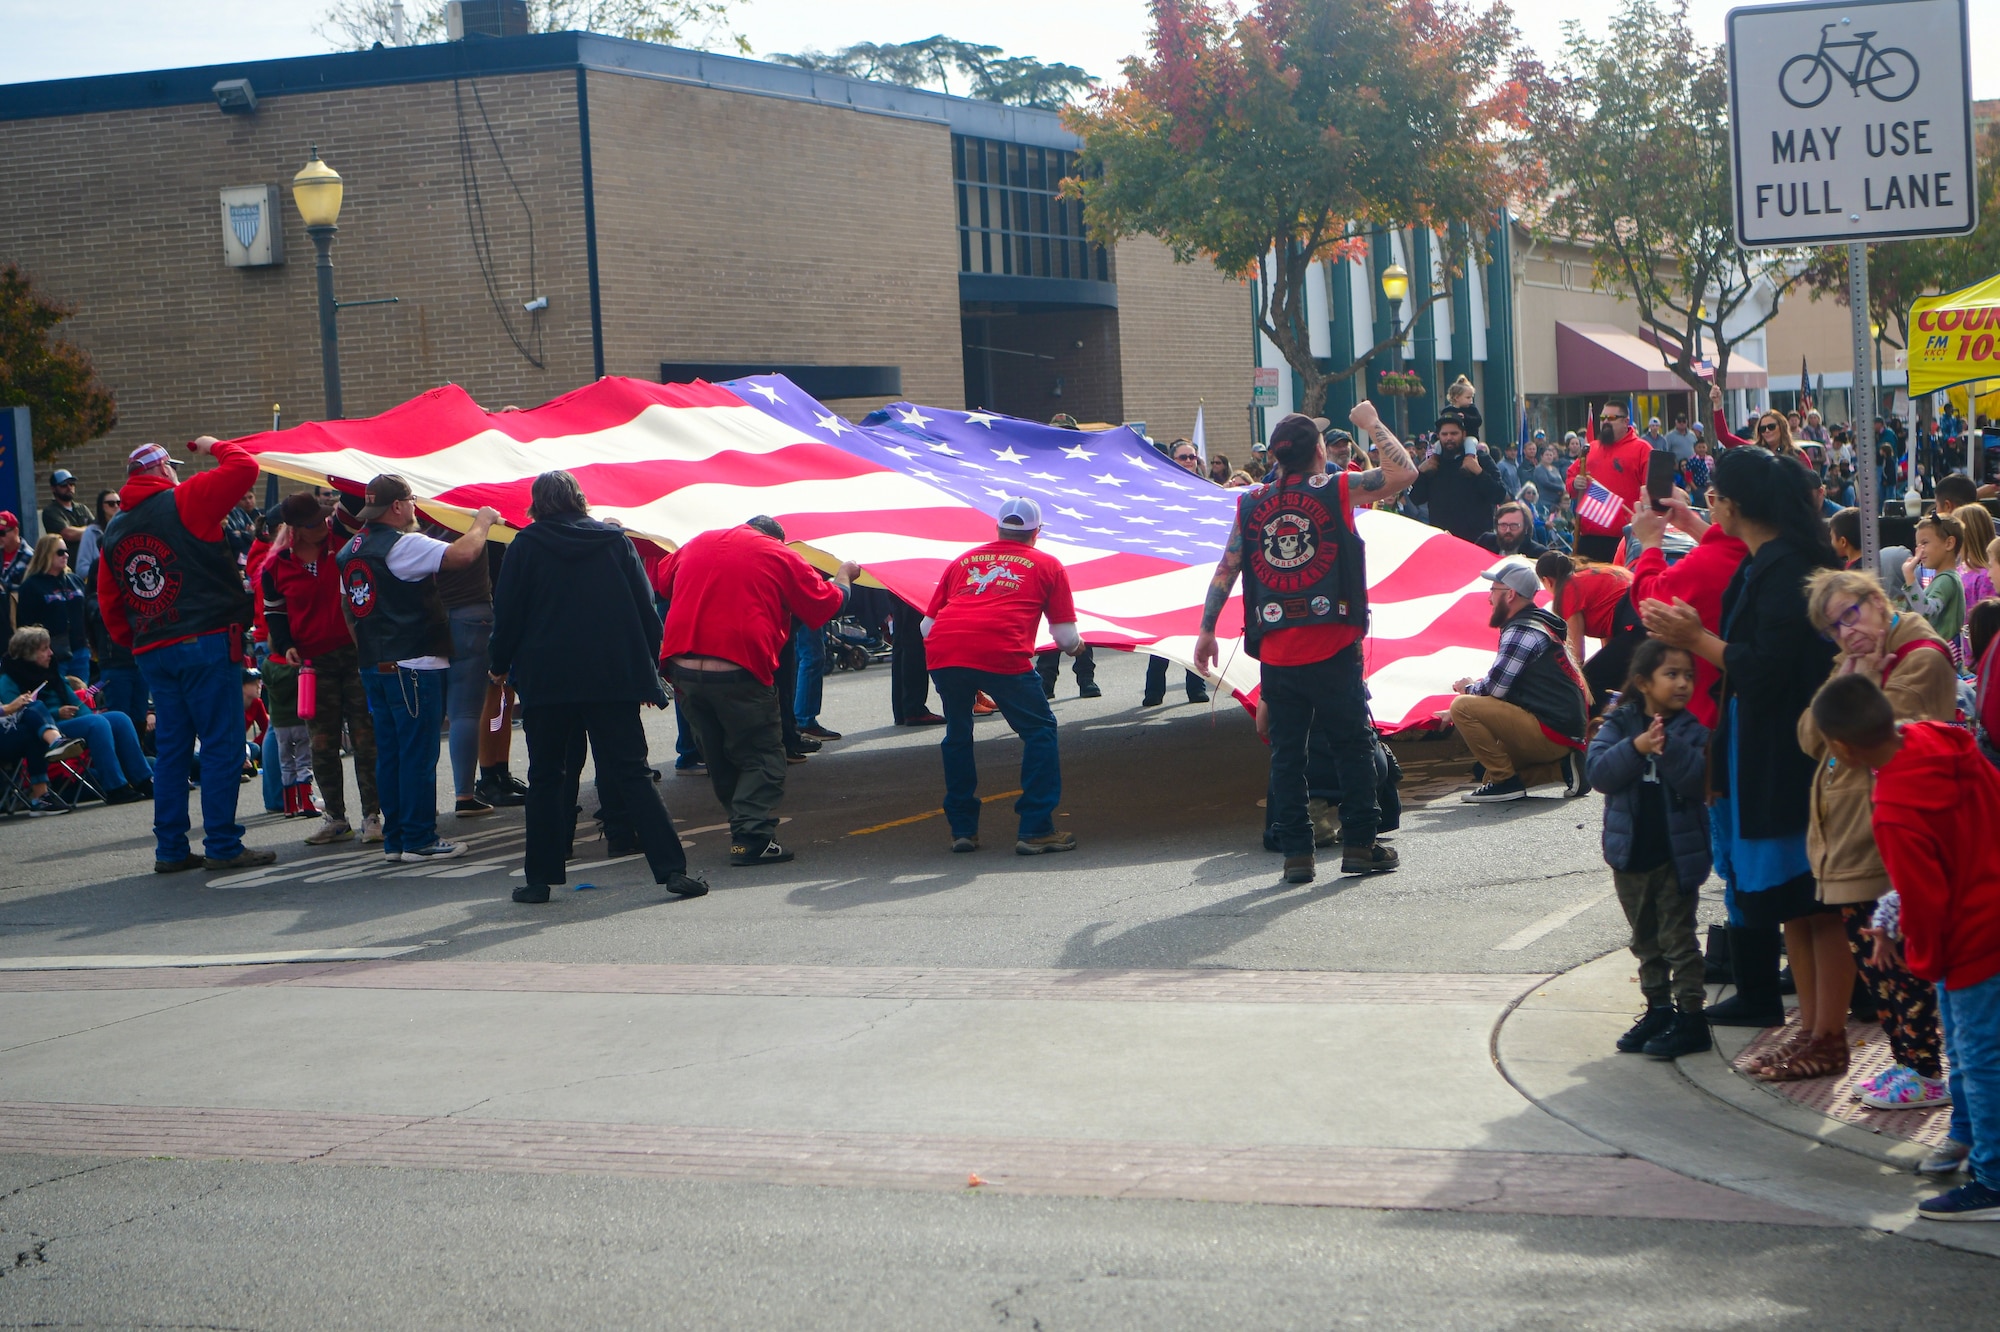 Parade participants wave the American flag during the Veterans Day parade in Marysville, Calif., on Nov. 11, 2022.